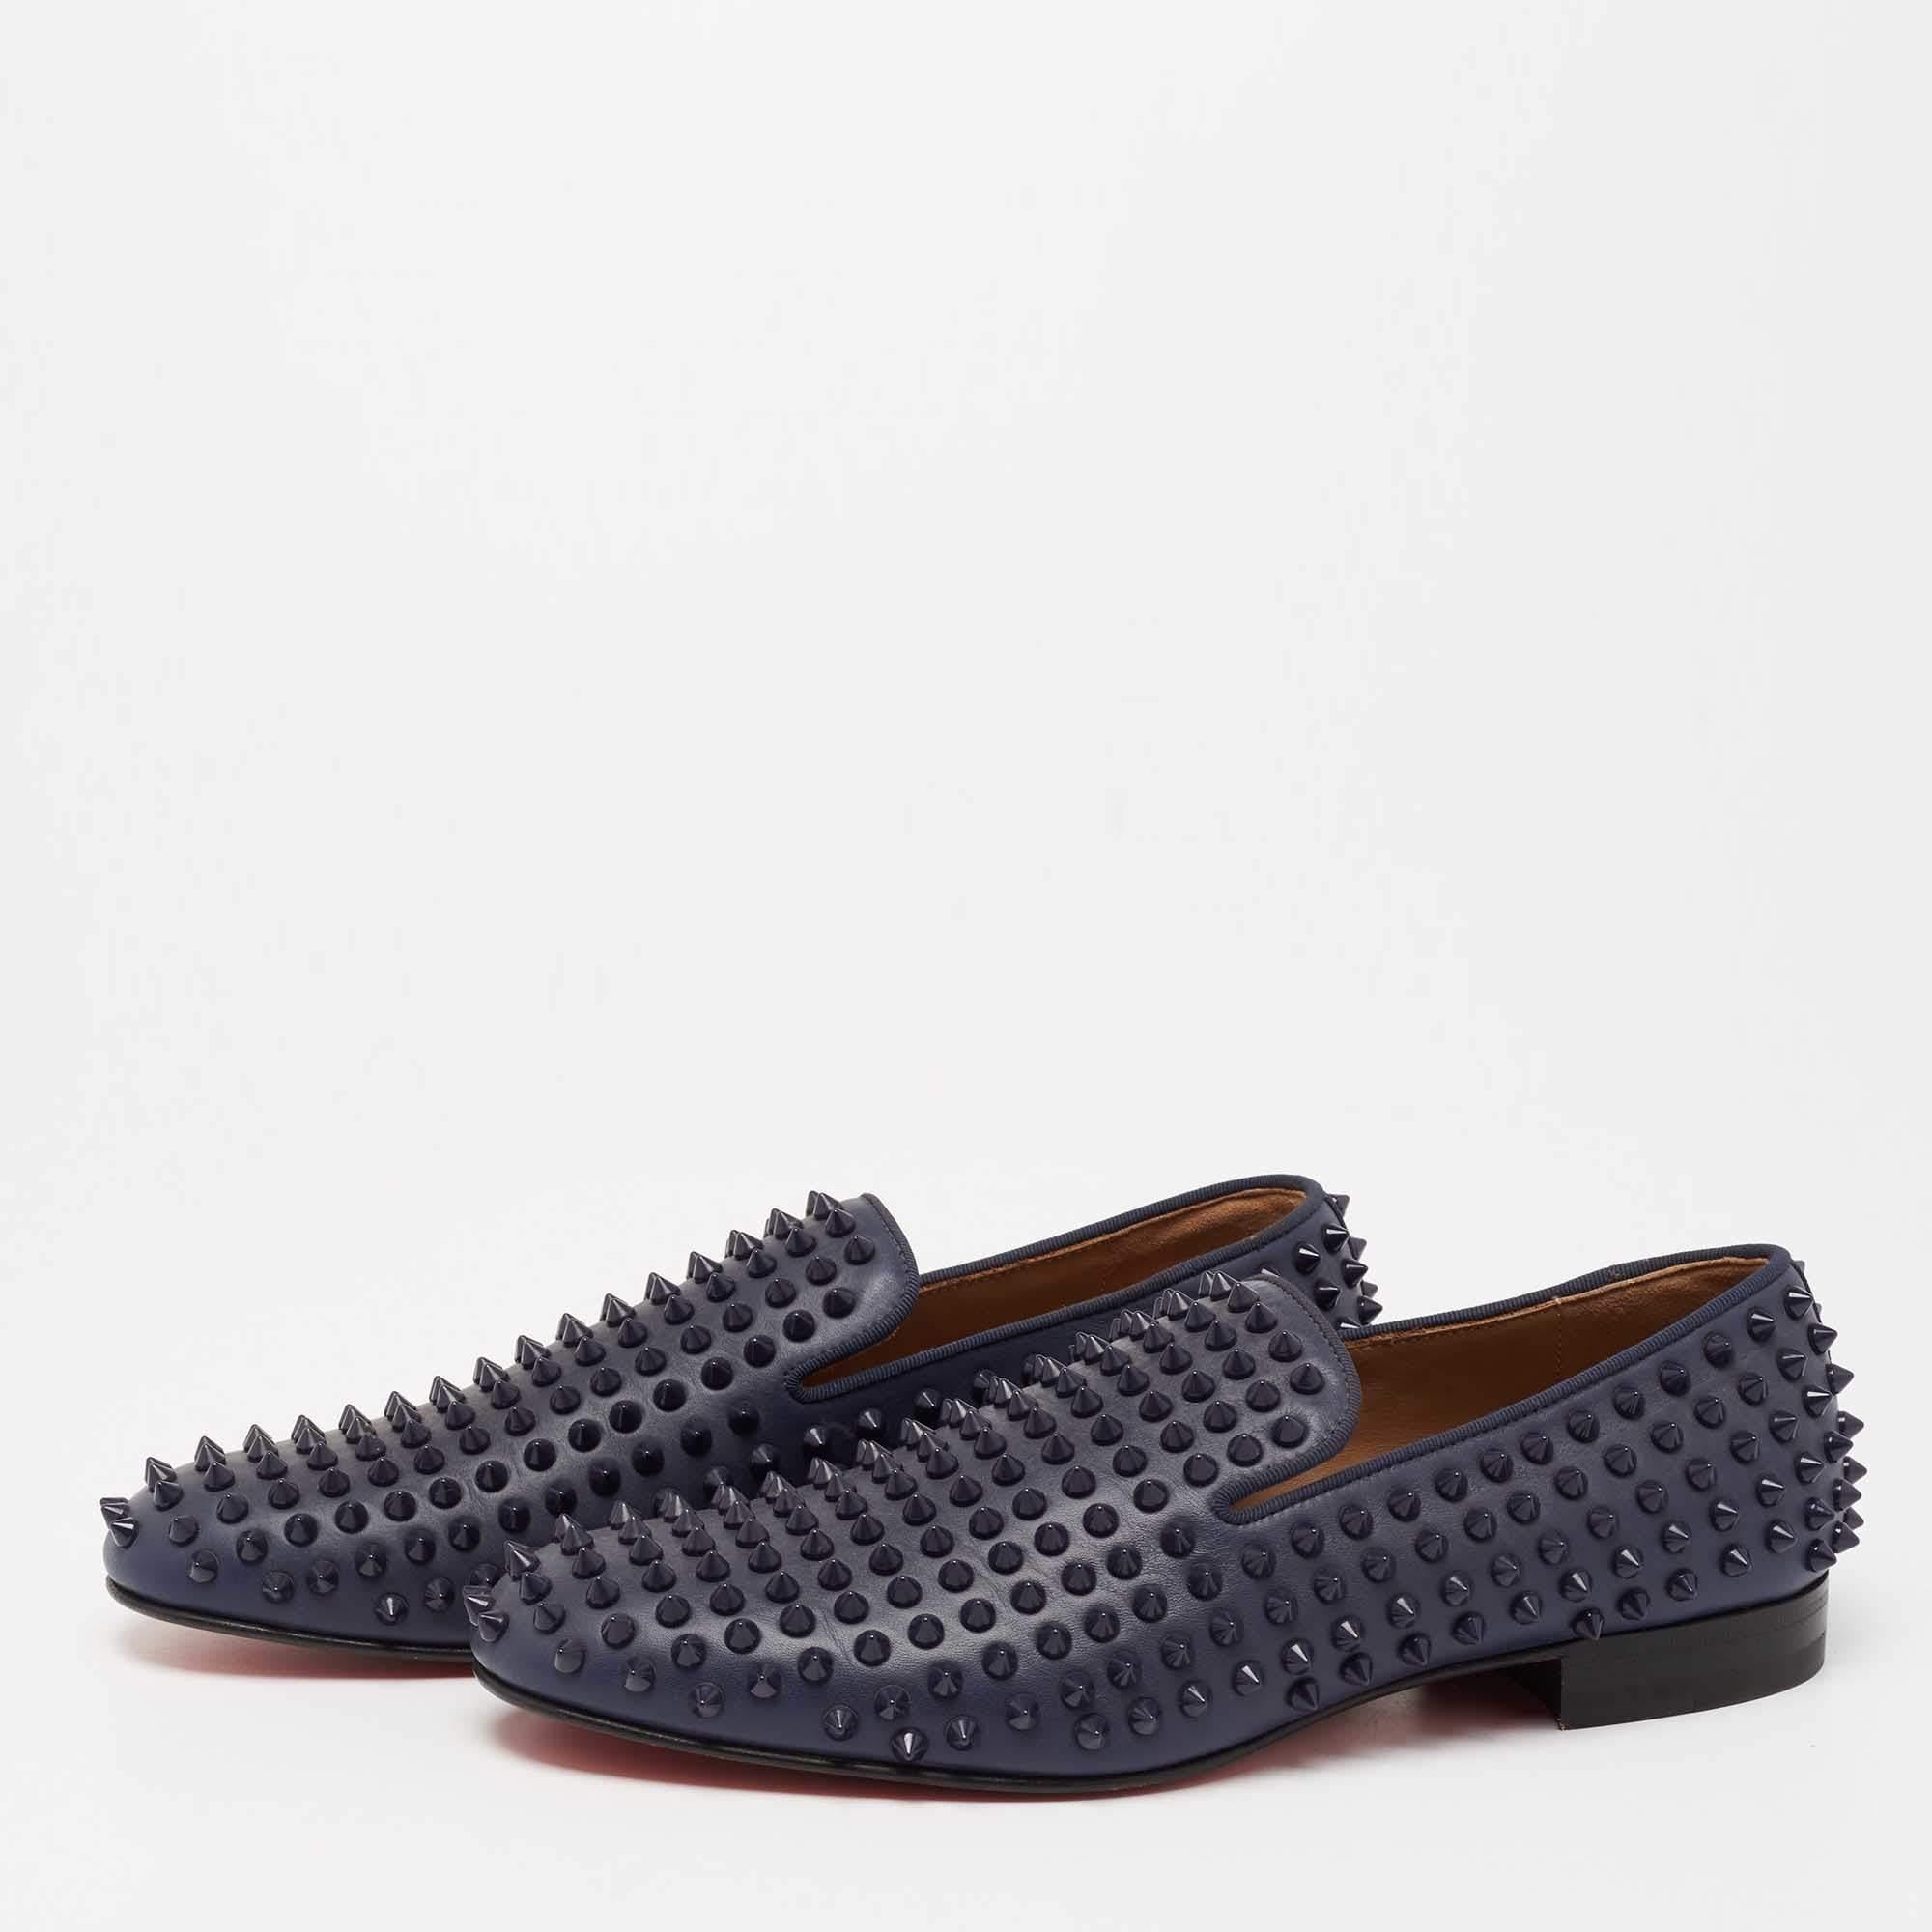 Christian Louboutin Navy Blue Leather Dandelion Spike Smoking Slippers Size 40 In Good Condition For Sale In Dubai, Al Qouz 2